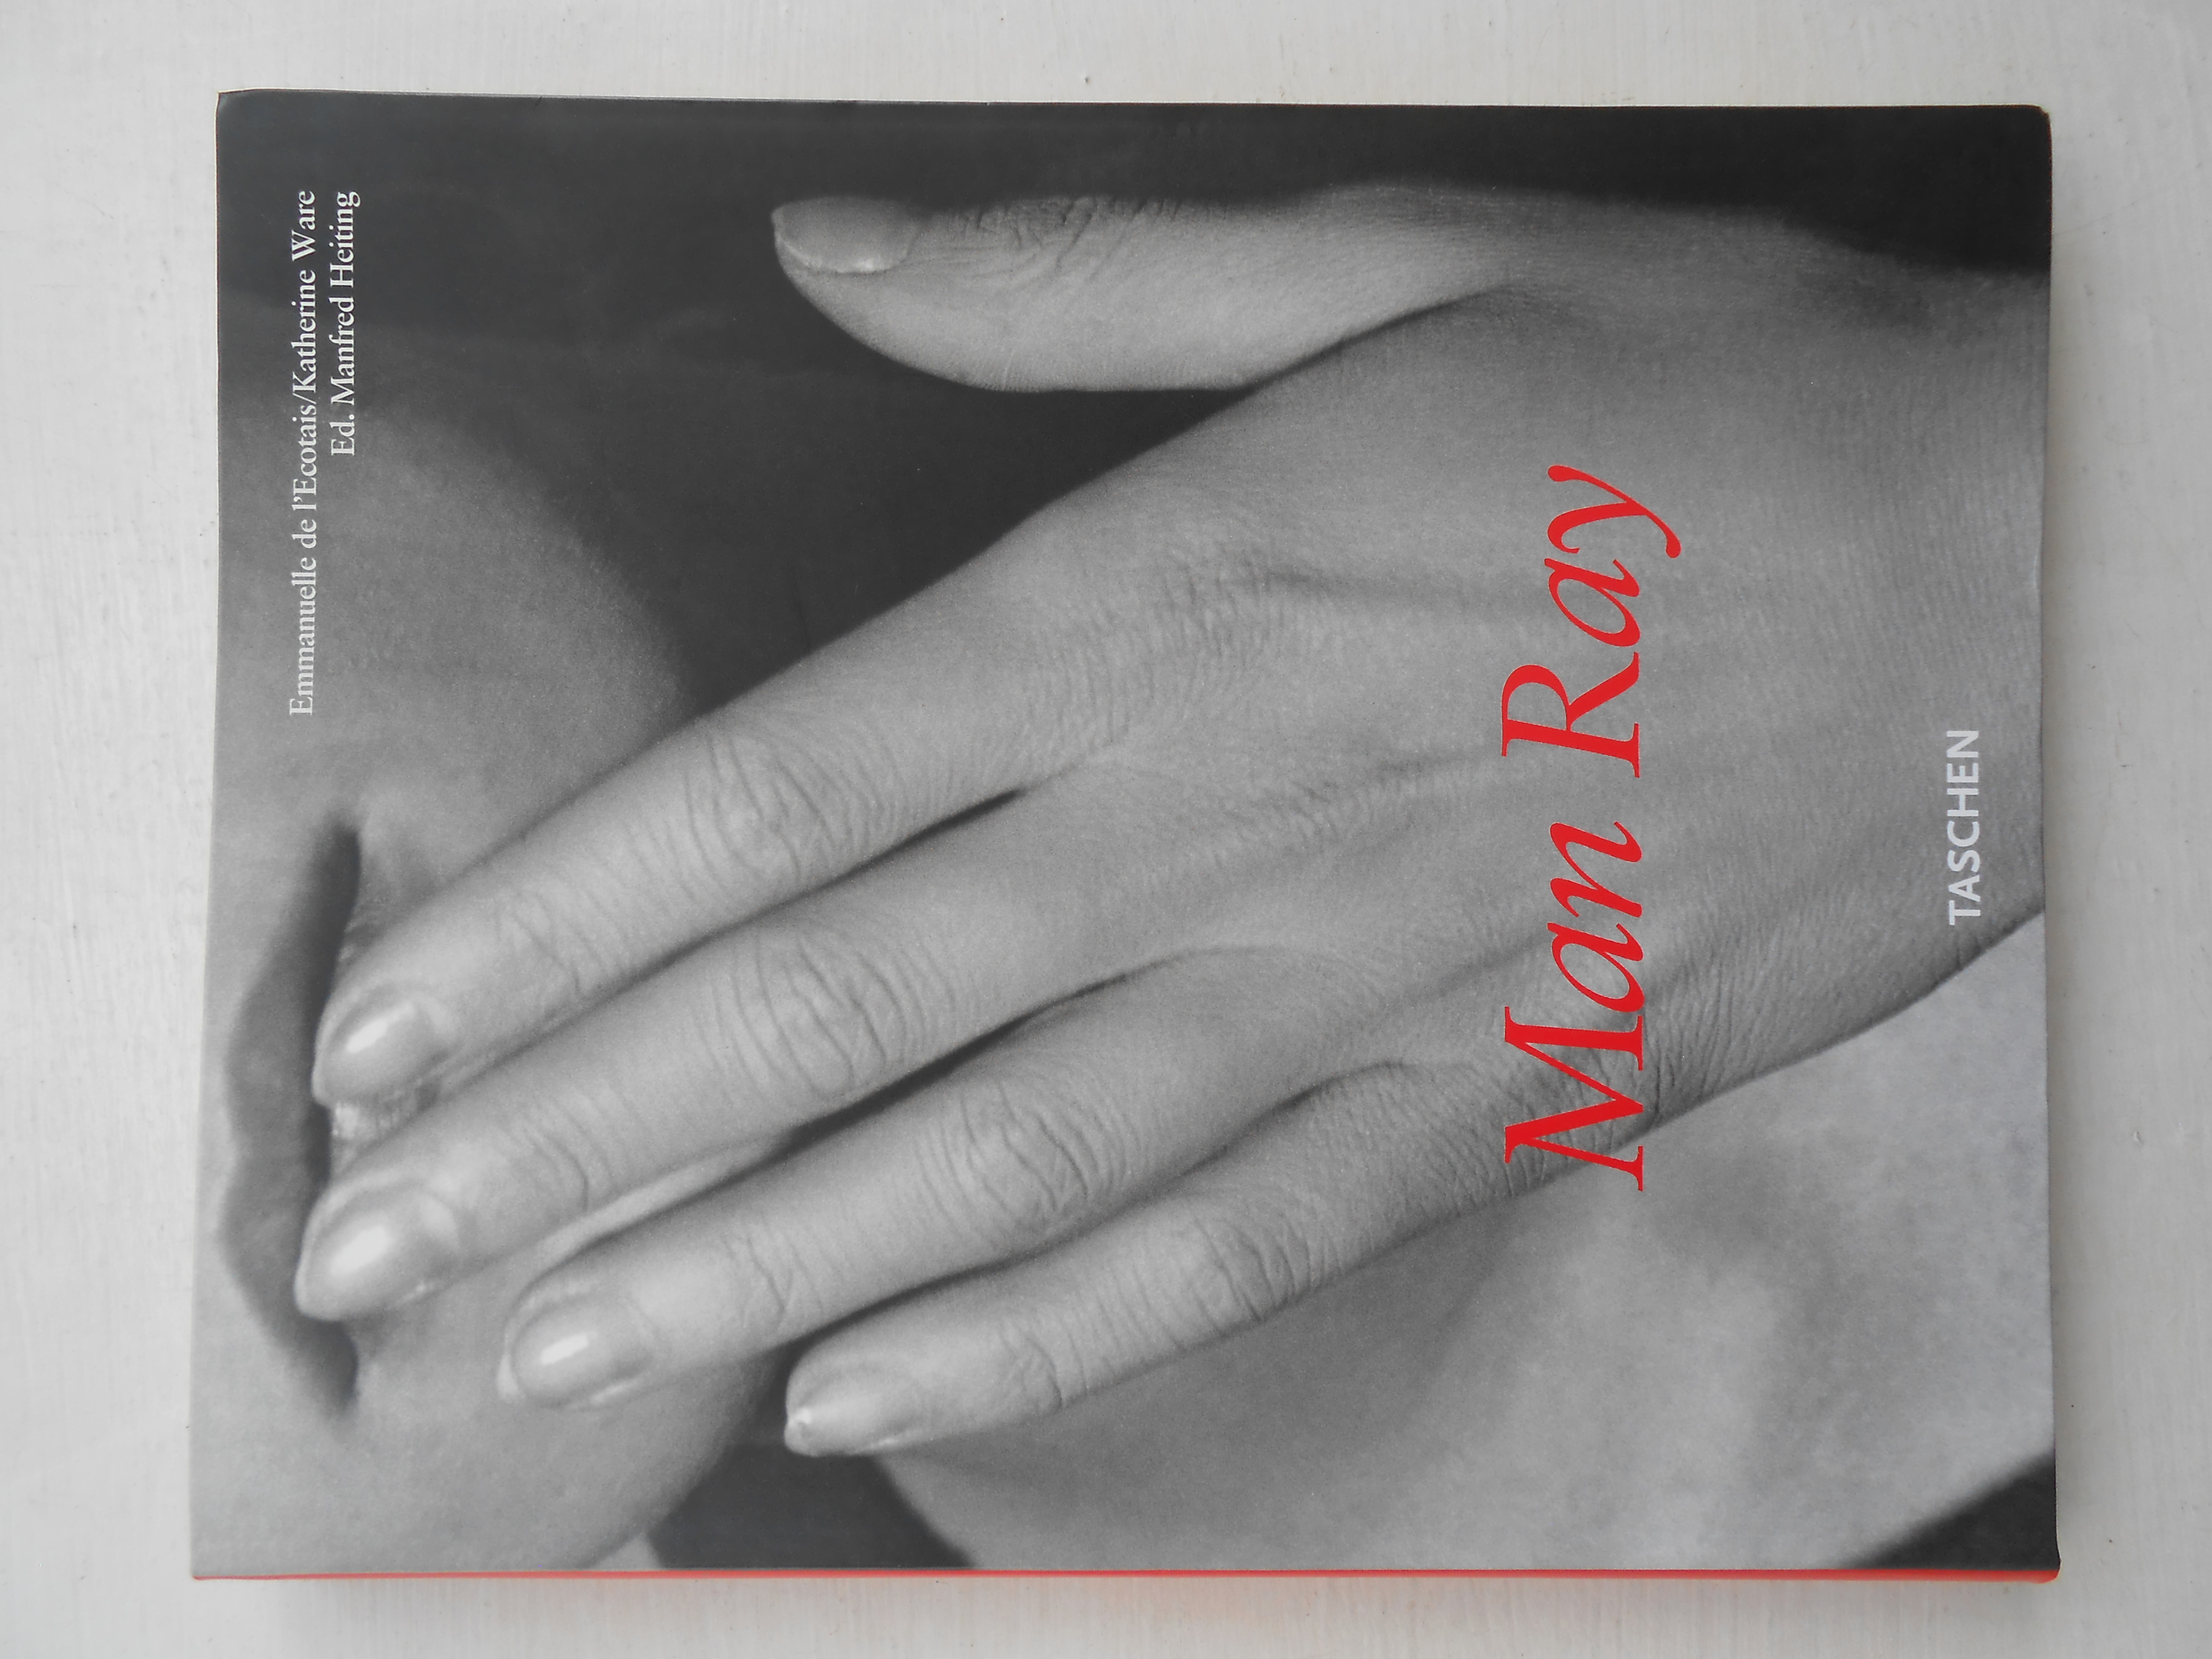 MAN RAY 1890-1976. - HEITING, Manfred (Edited by). Essays by Emmanuelle de l'Ecotais and Katherine Ware. A personal portrait by André Breton.